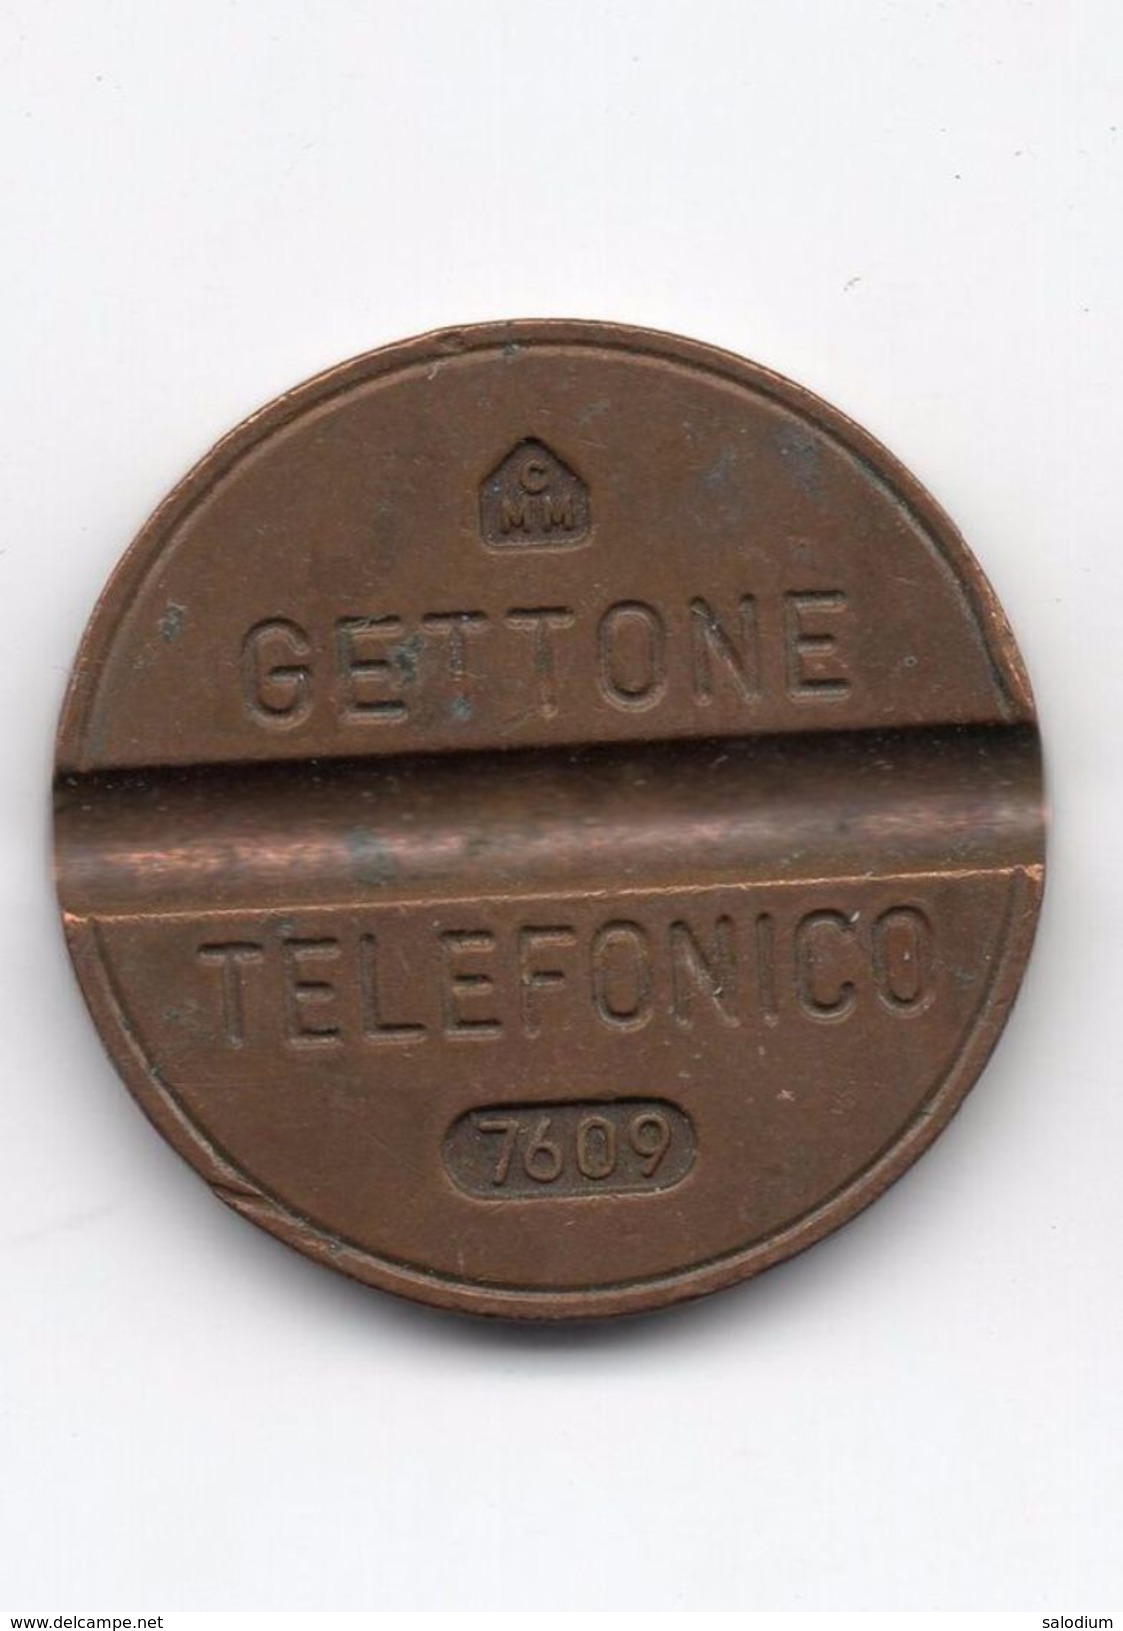 Gettone Telefonico 7609 Token Telephone - (Id-670) - Professionals/Firms